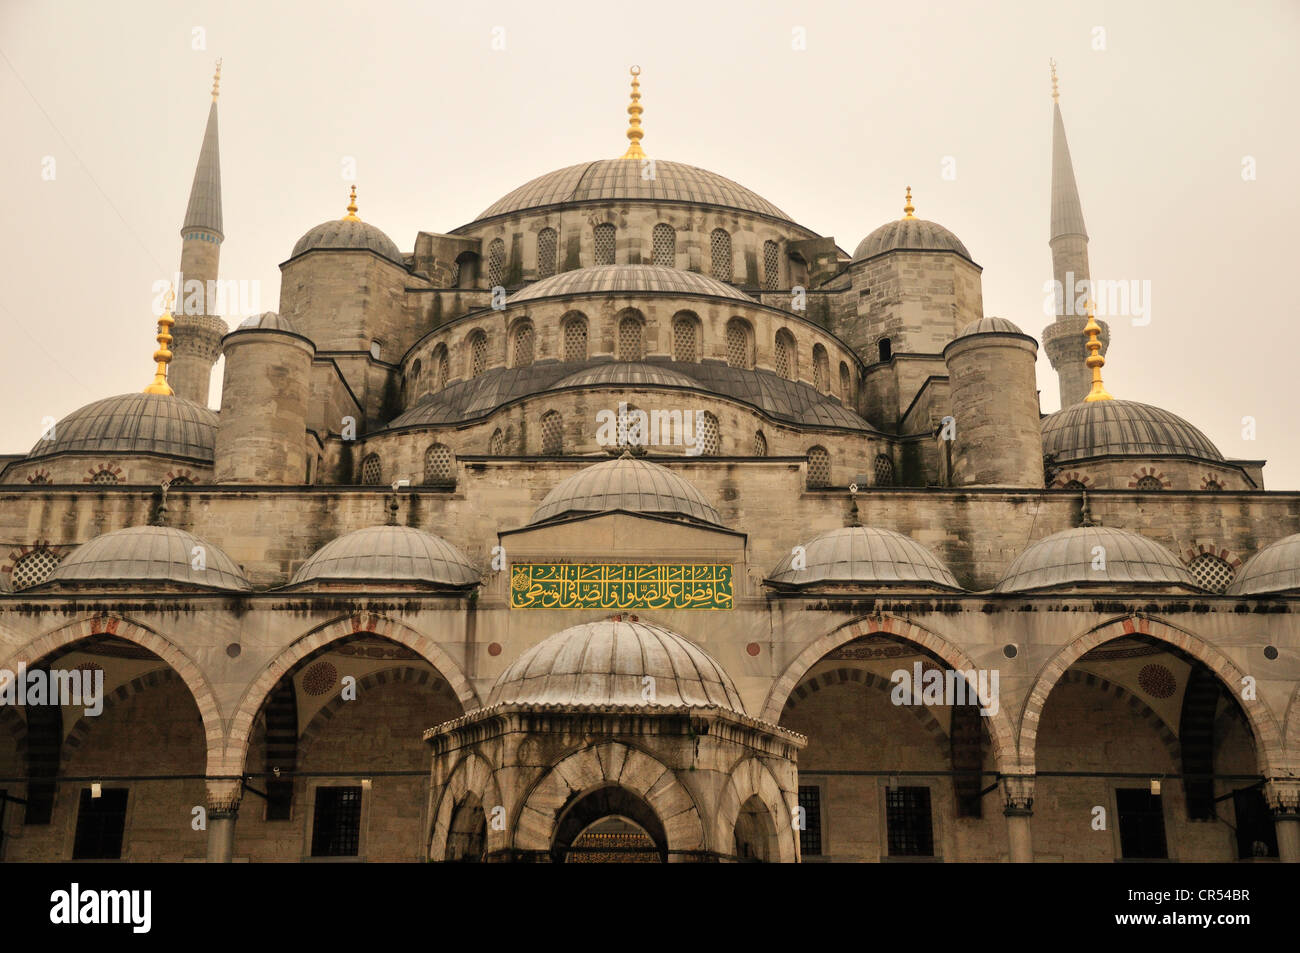 Sultan Ahmed Mosque or Blue Mosque, Istanbul, Turkey, Europe Stock Photo